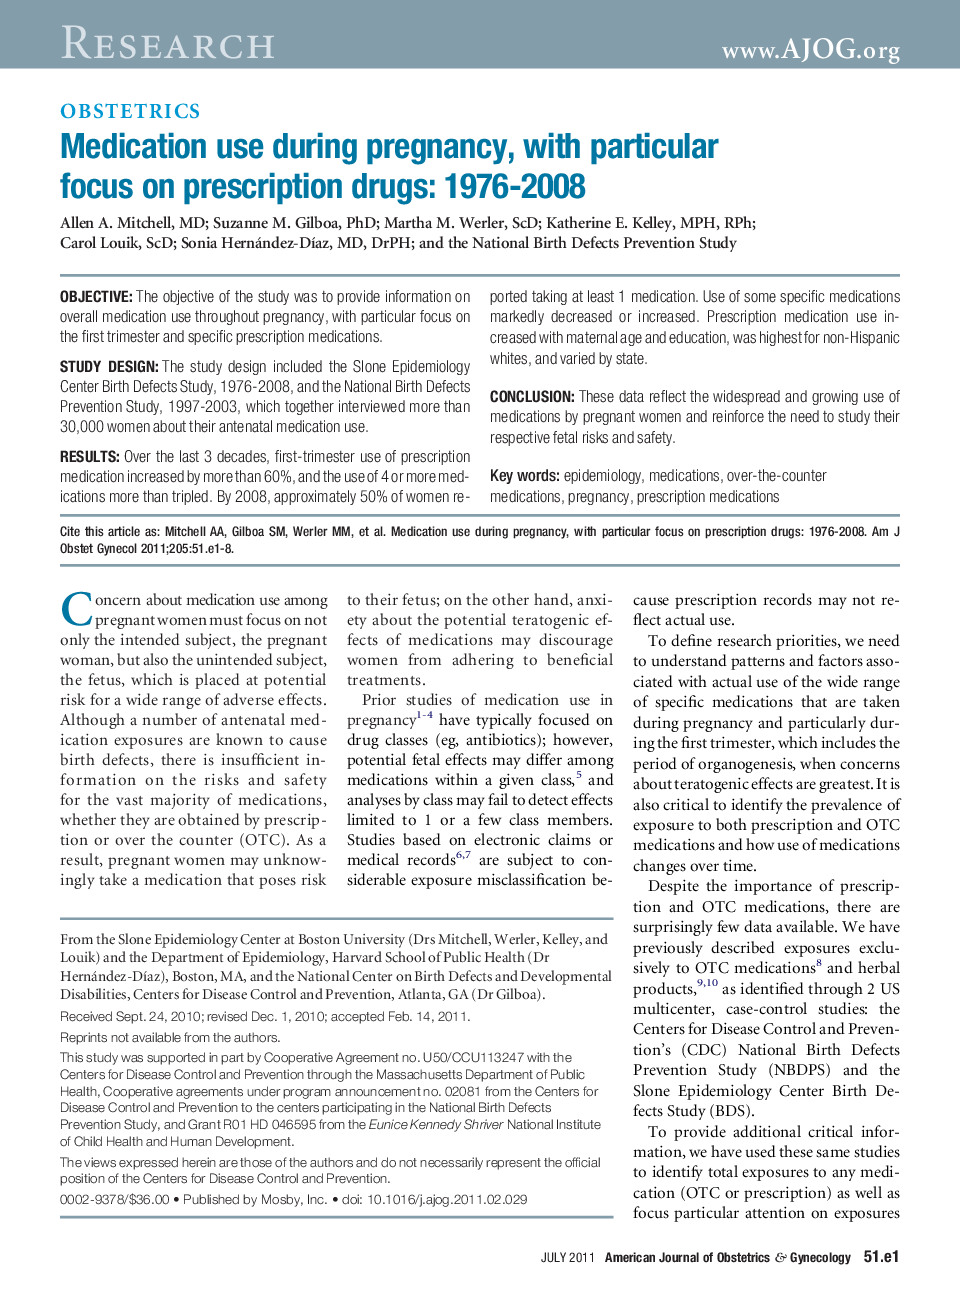 Medication use during pregnancy, with particular focus on prescription drugs: 1976-2008